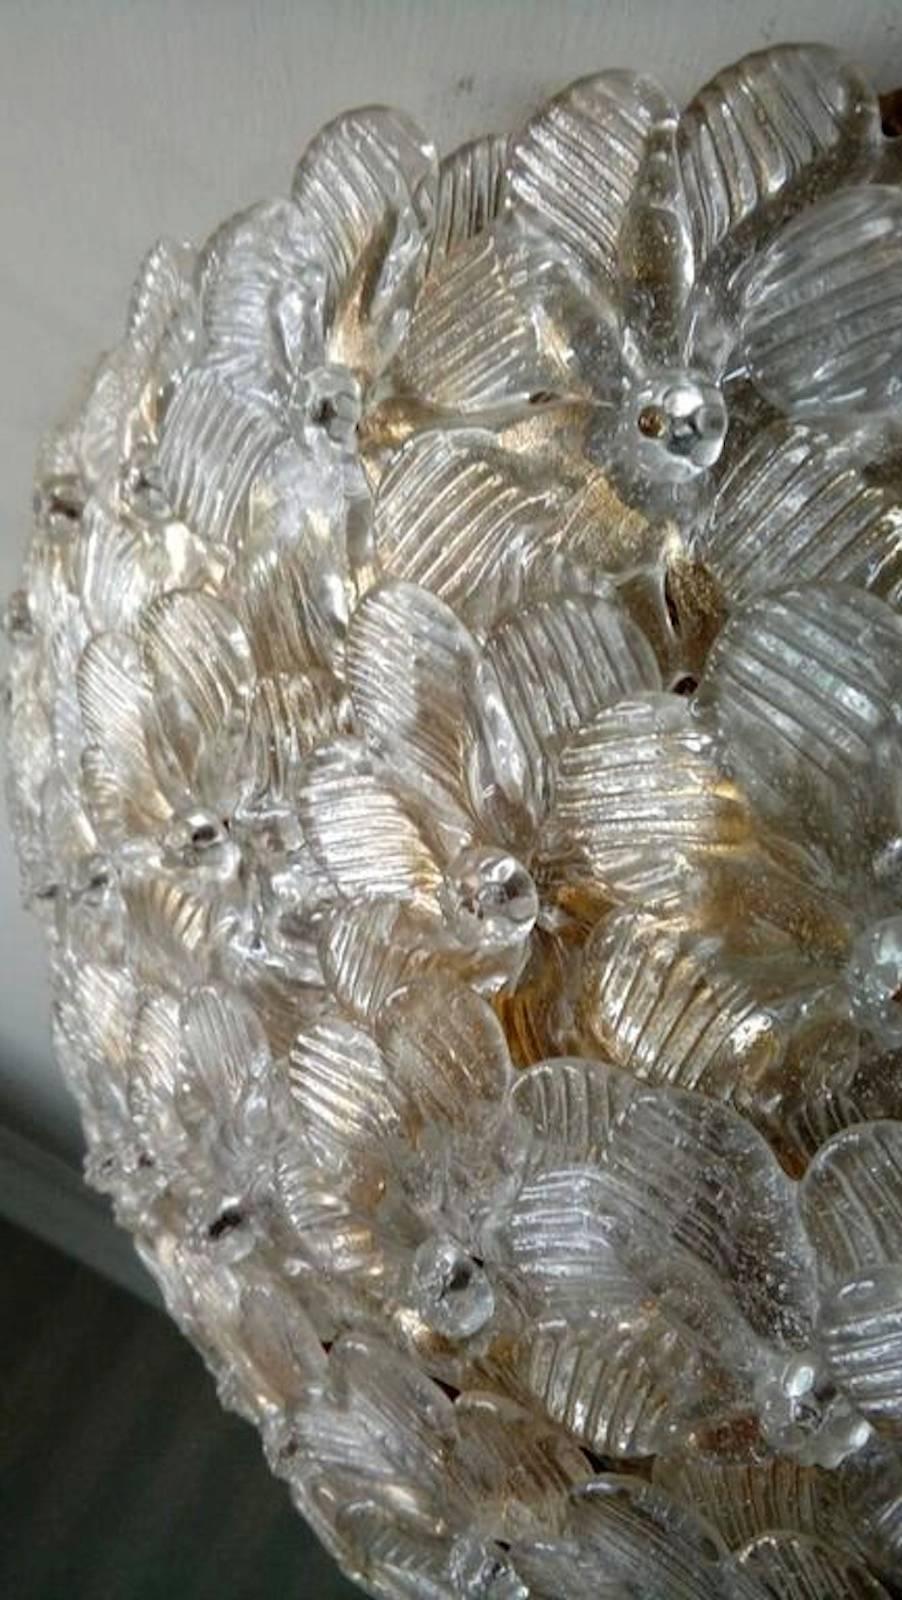 Barovier & Toso Venetian glass flowers basket ceiling.
The ceiling lamp is made of dozens of small roses in precious Murano glass with gold inclusions. Measures:
Measures: Diameter 42 cm
Height 15 cm.